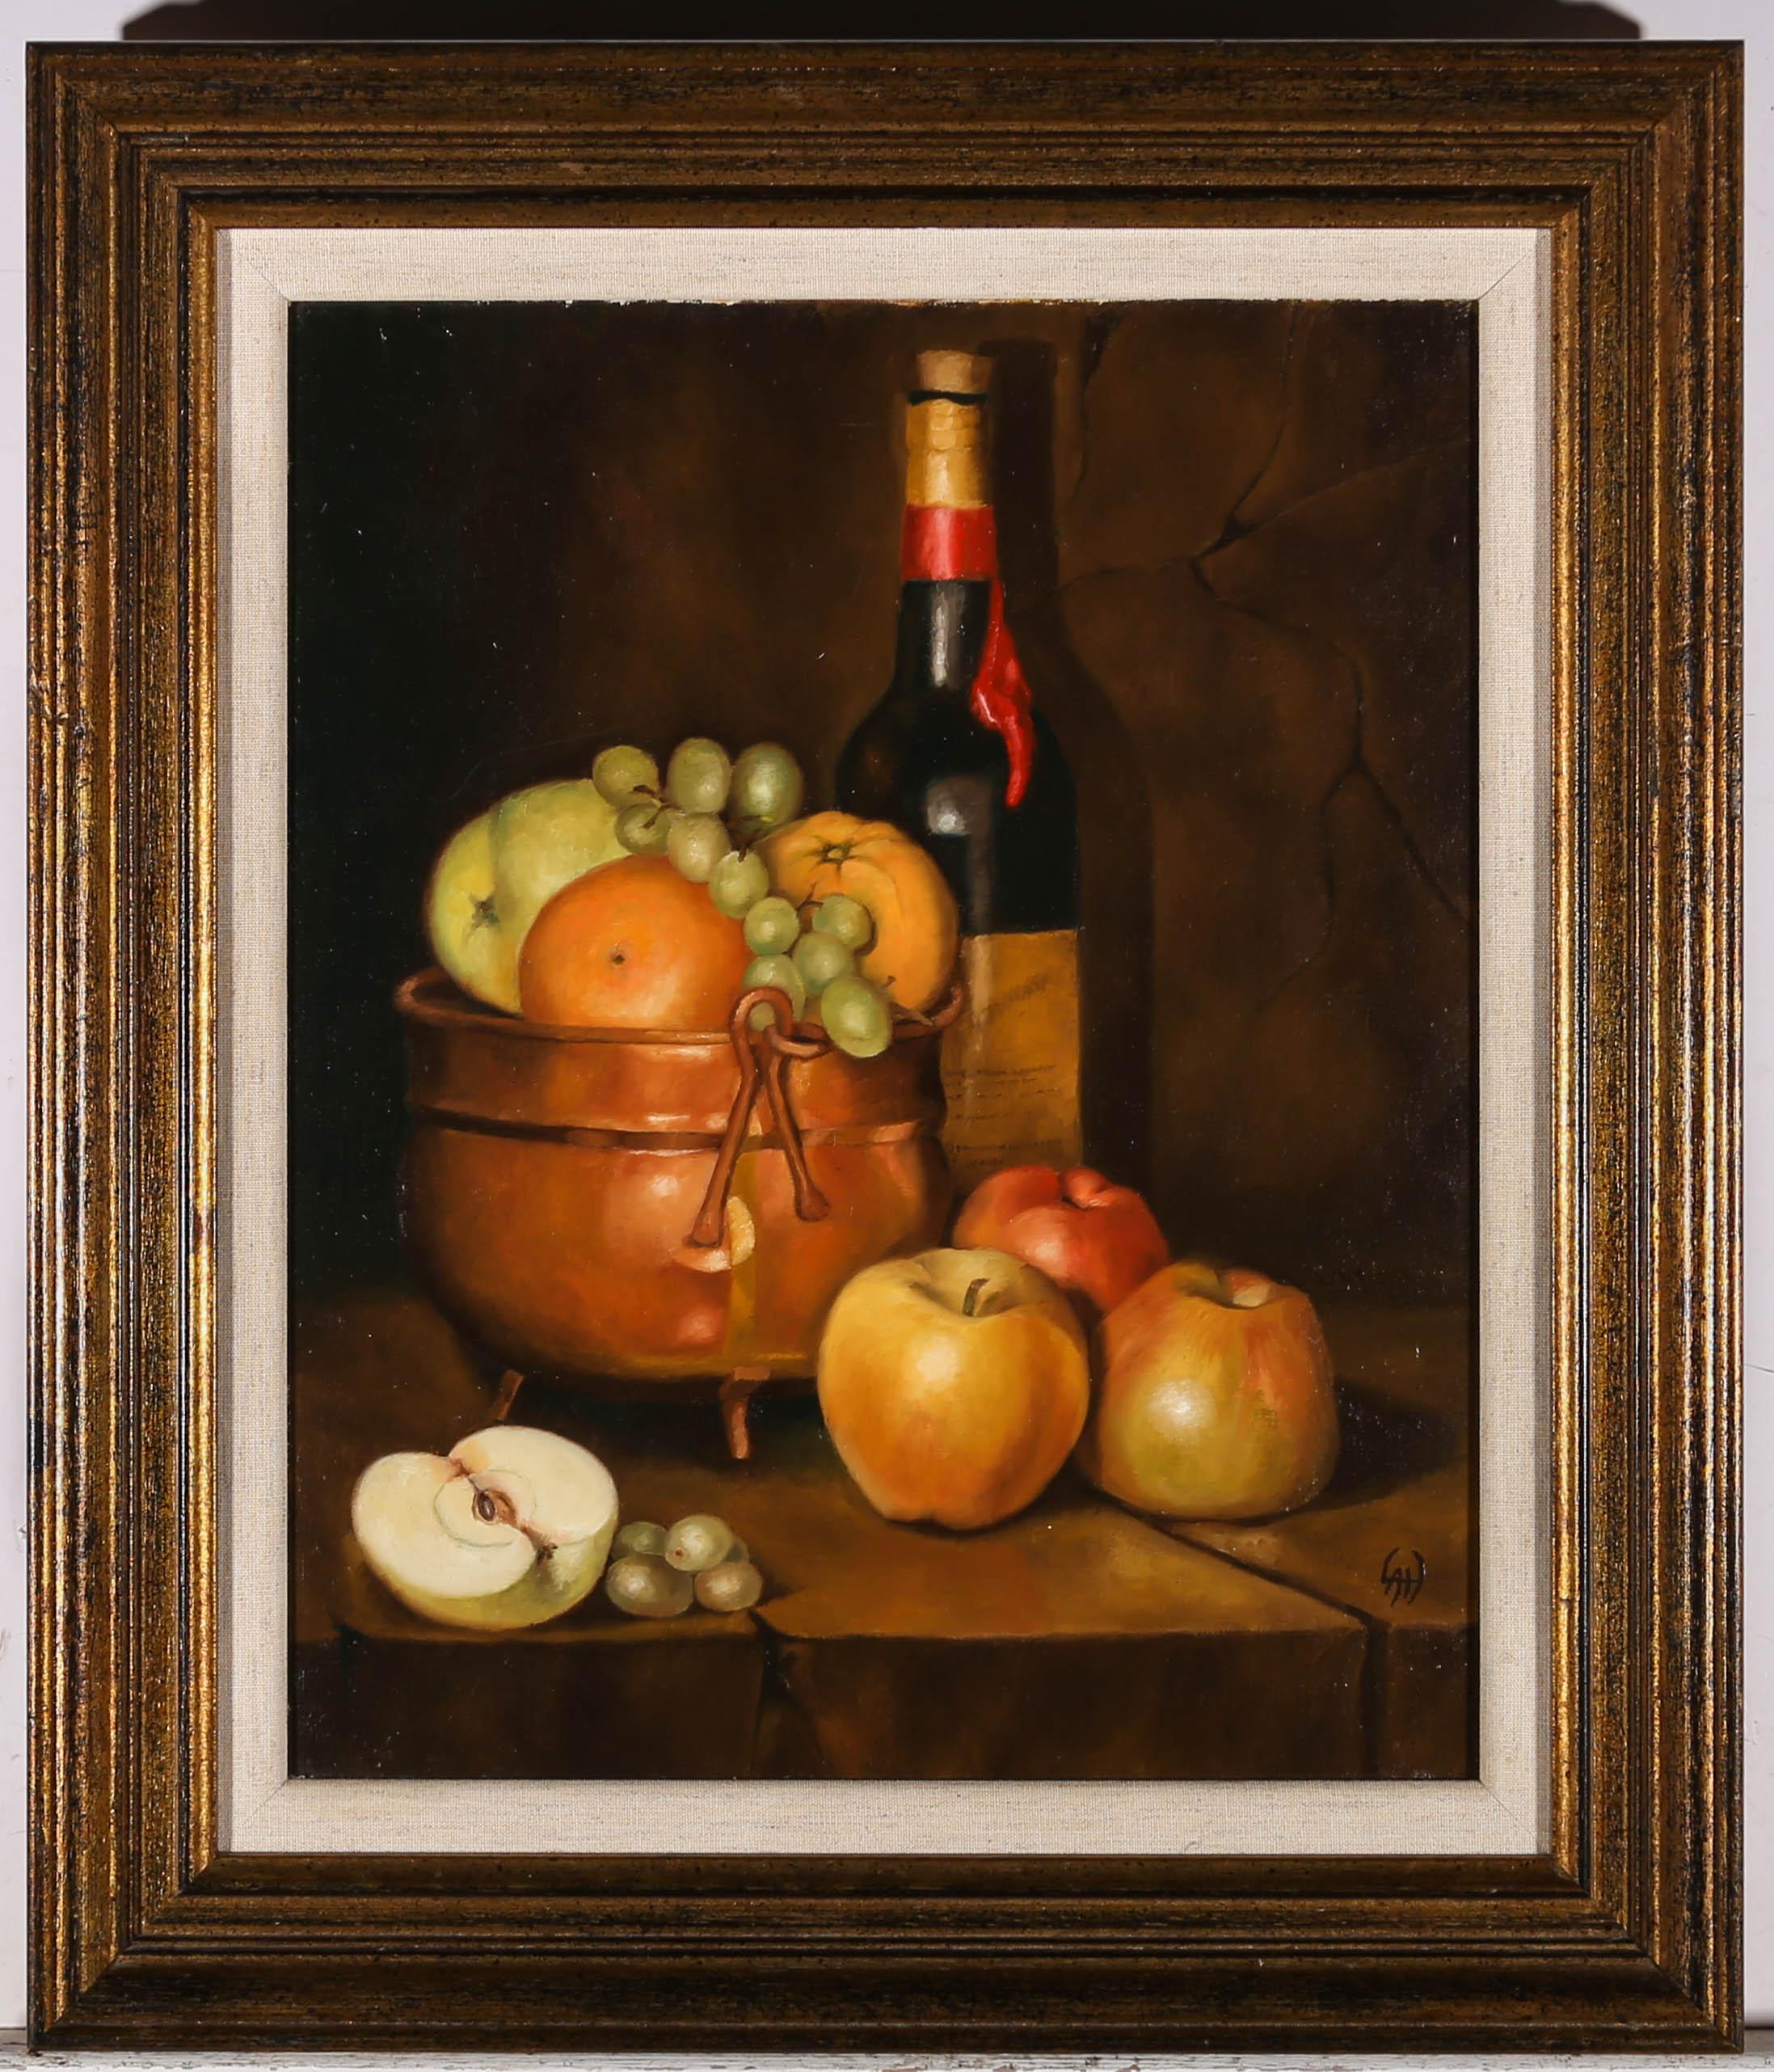 A still life depicting a copper pot full of fruit beside a bottle of wine and apples and grapes on the table. Presented in a distressed gilt-effect wooden frame with a linen slip. Monogrammed to the lower-right corner. Signed and dated on the verso.